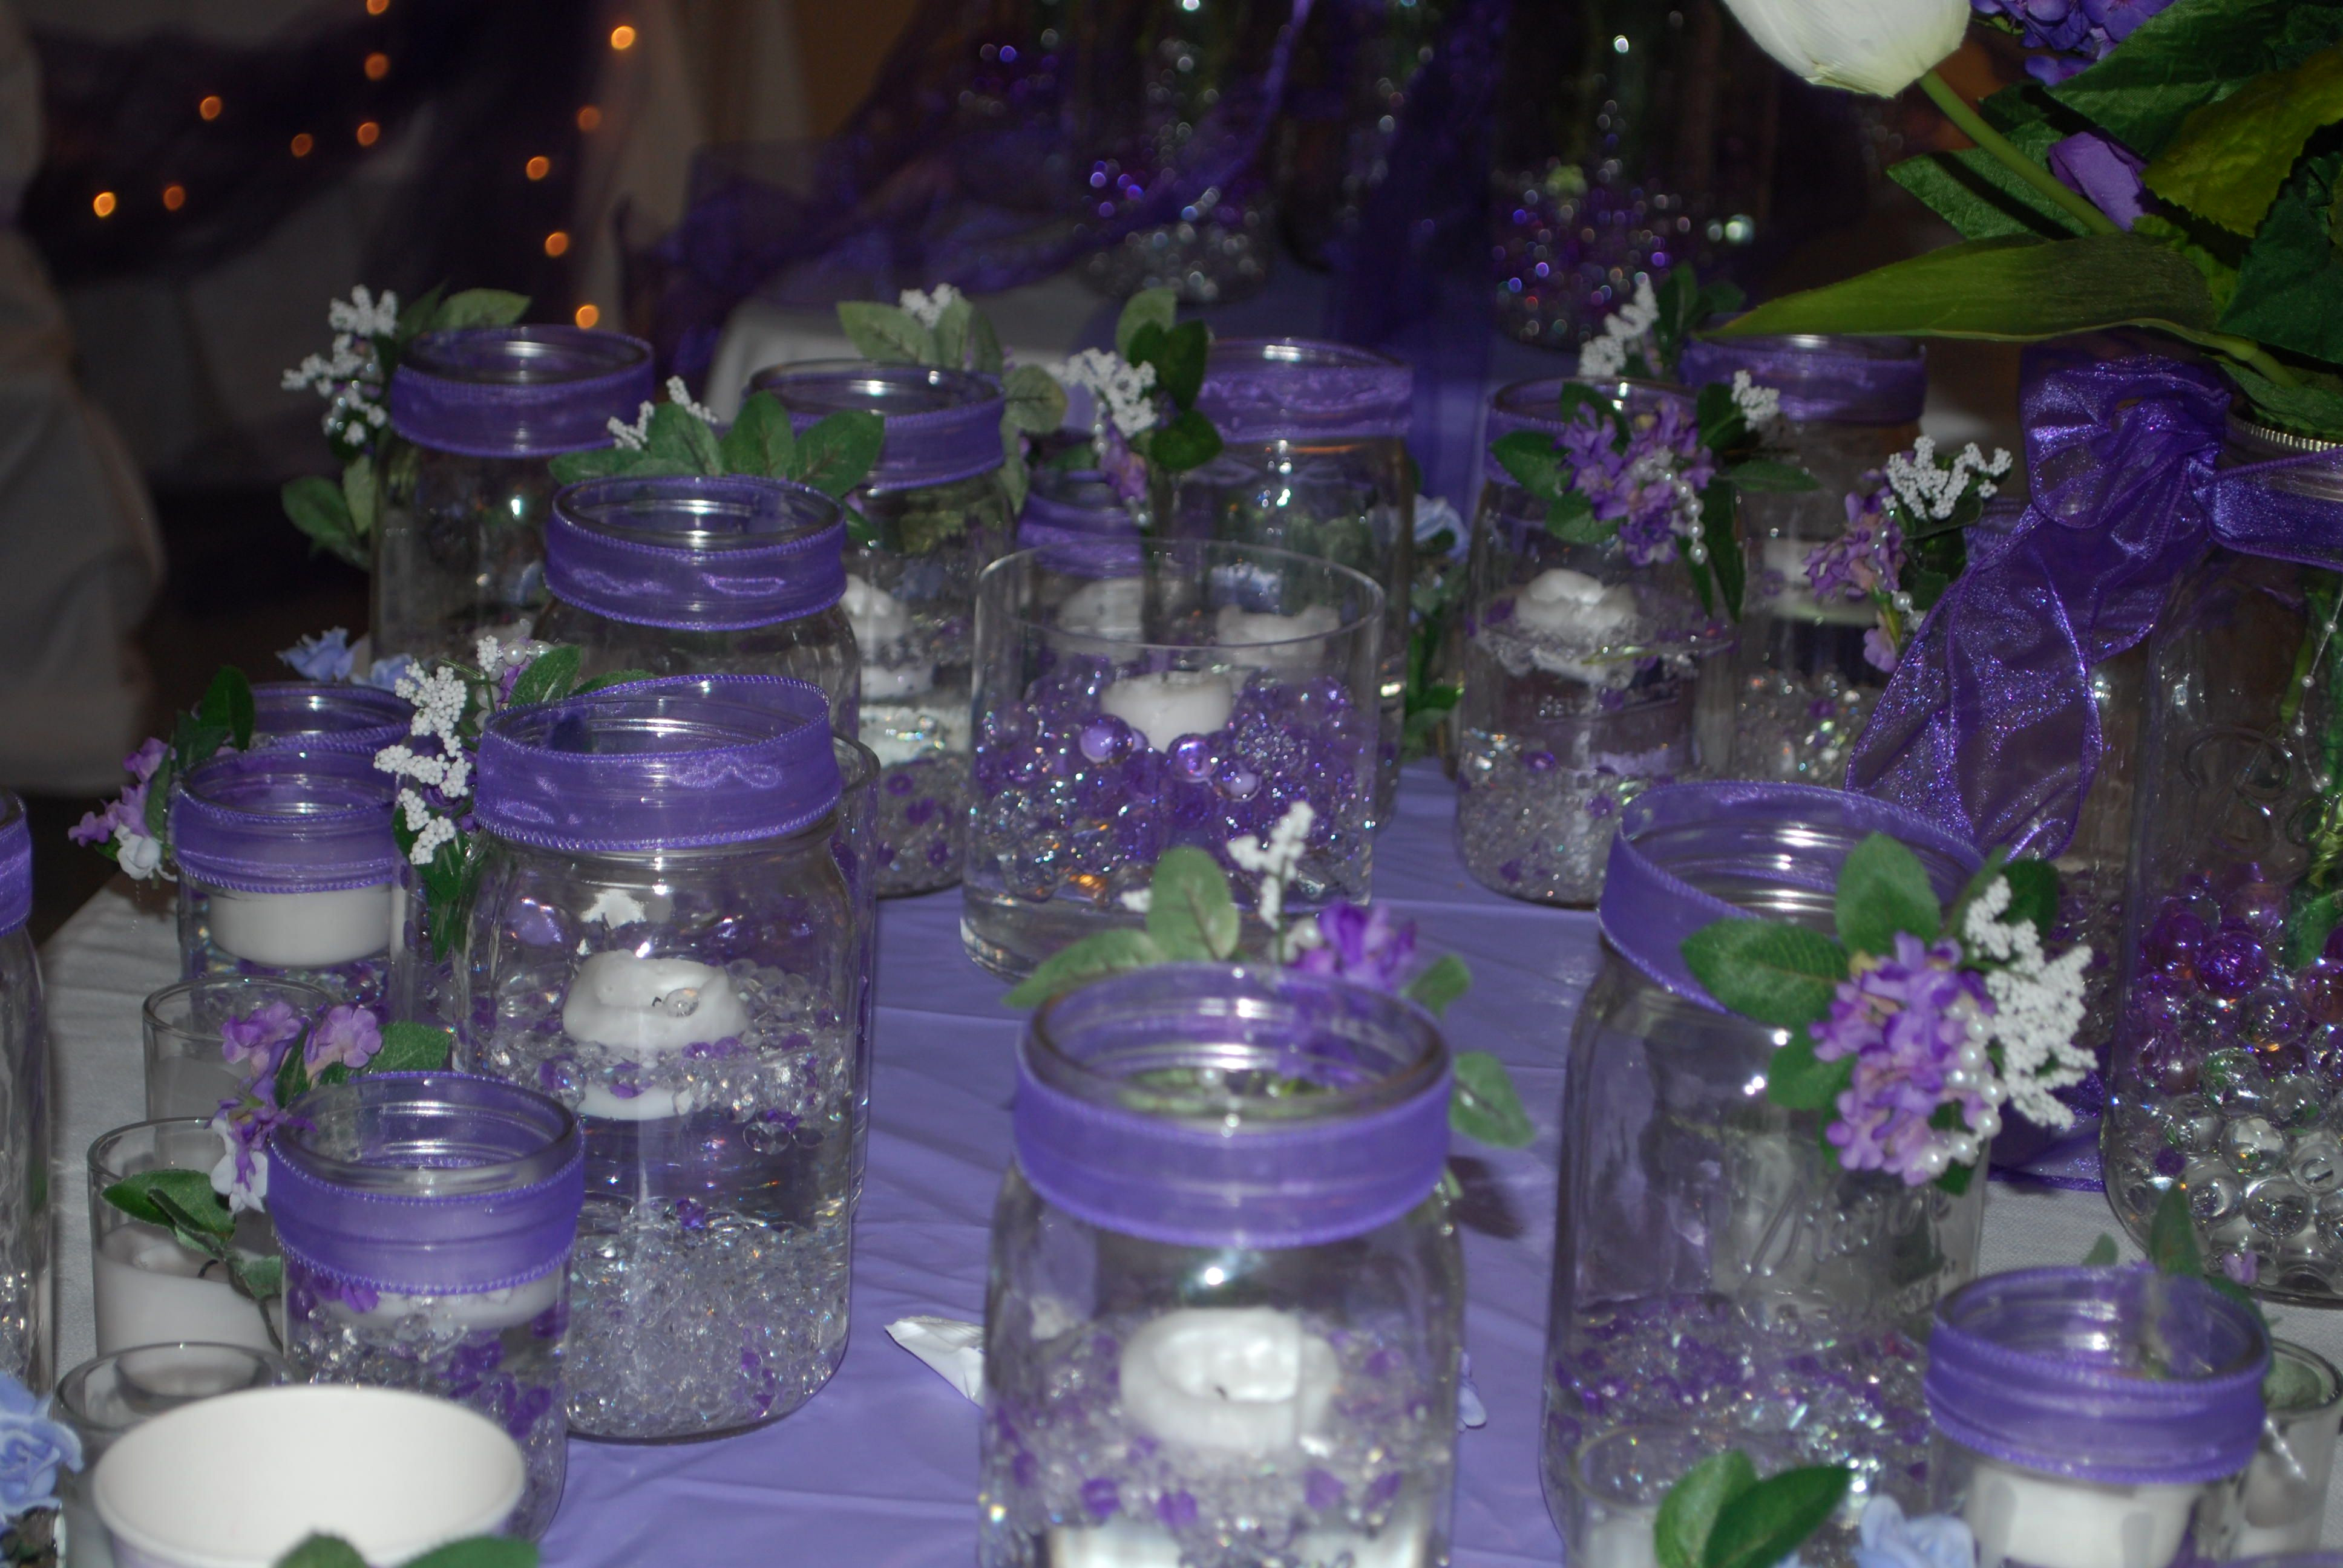 27 Unique Floating Candle Vases Centerpieces 2024 free download floating candle vases centerpieces of mason jar wedding decorations fresh living room vases wedding with mason jar wedding decorations beautiful mason jars filled with water beads floating c